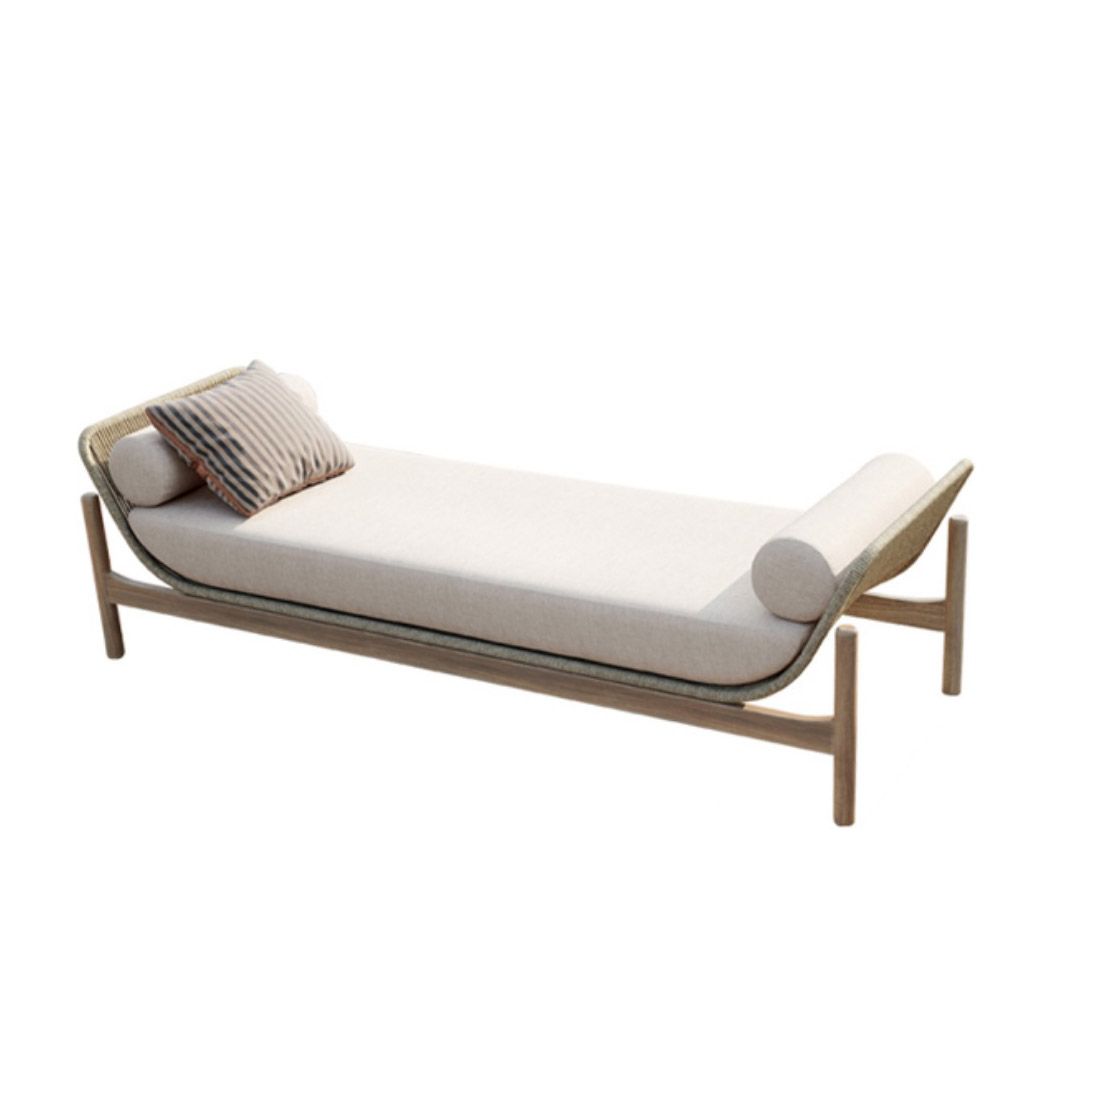 Natural Outdoor Patio Sofa with Cushion Wood Or Metal Frame Patio Sofa with Rope Accent